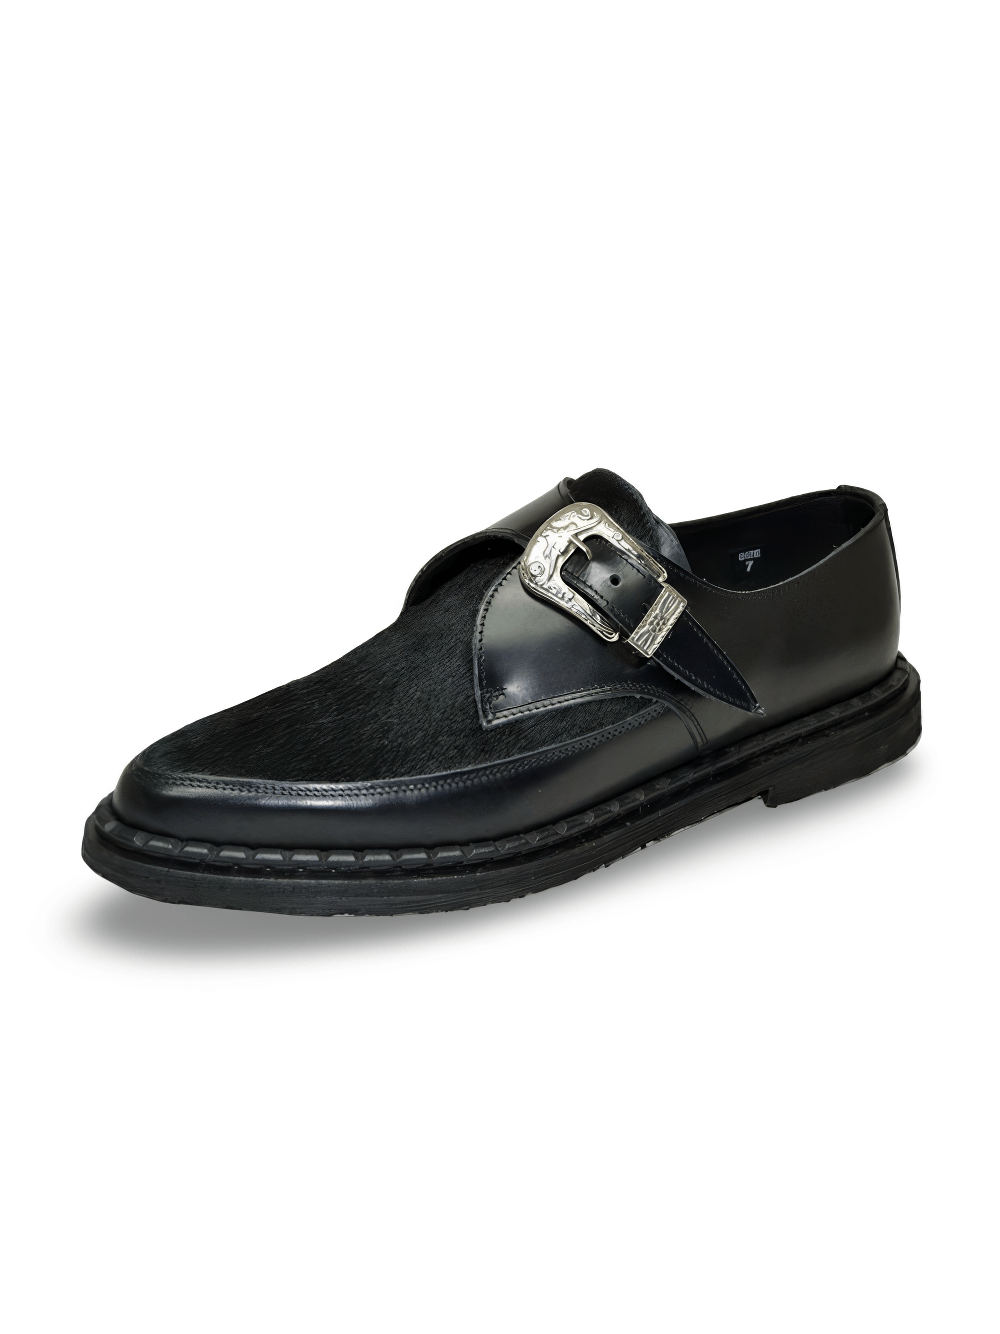 Unisex Sleek Black Pointed Dress Shoes with Buckle